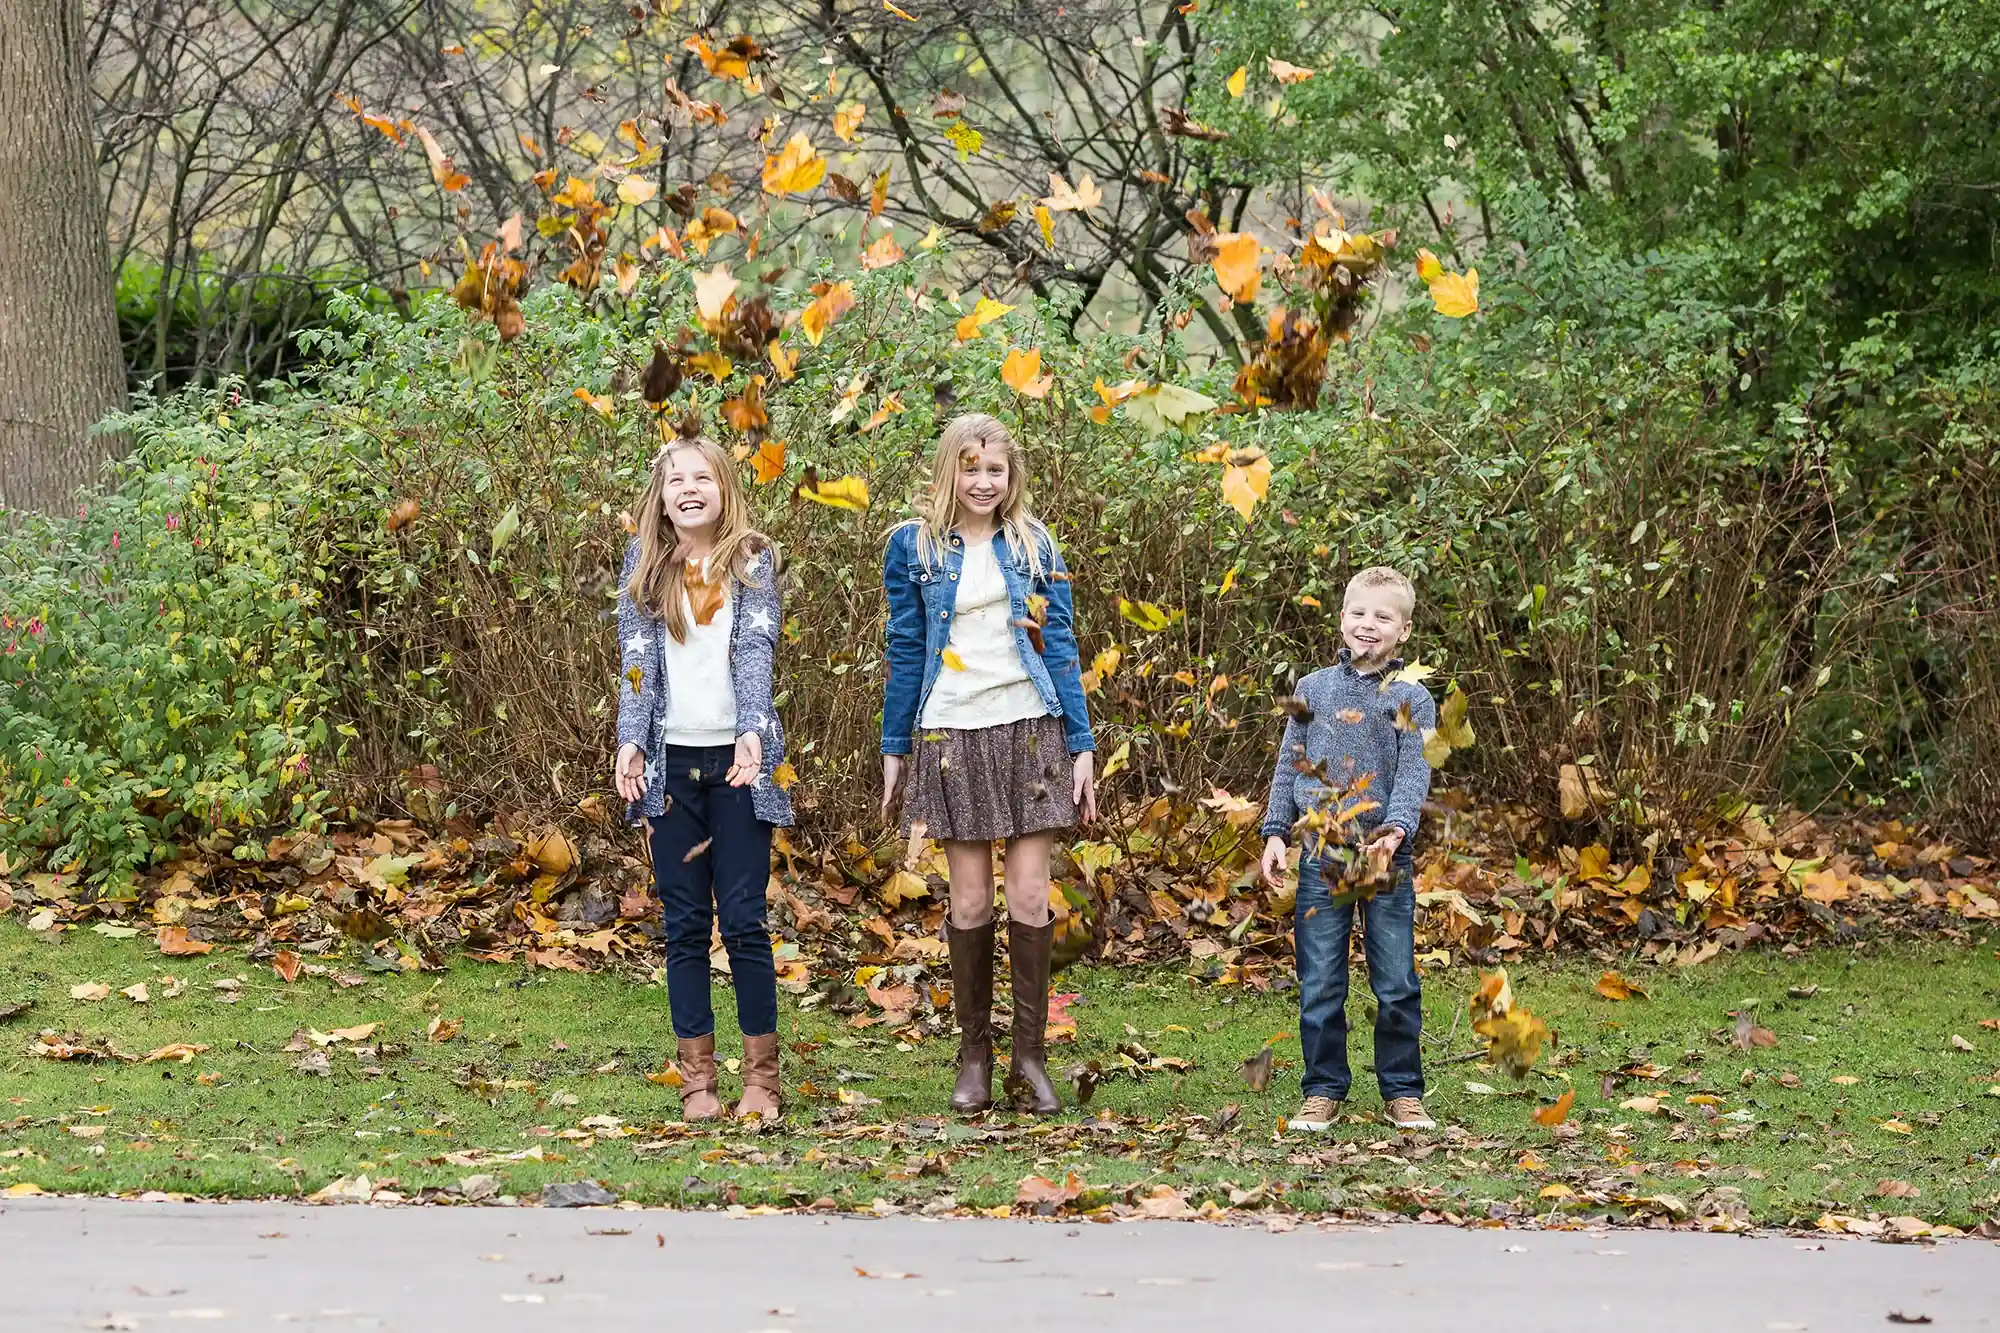 Three children stand on grass, smiling as they throw autumn leaves in the air, with bushes and trees in the background.